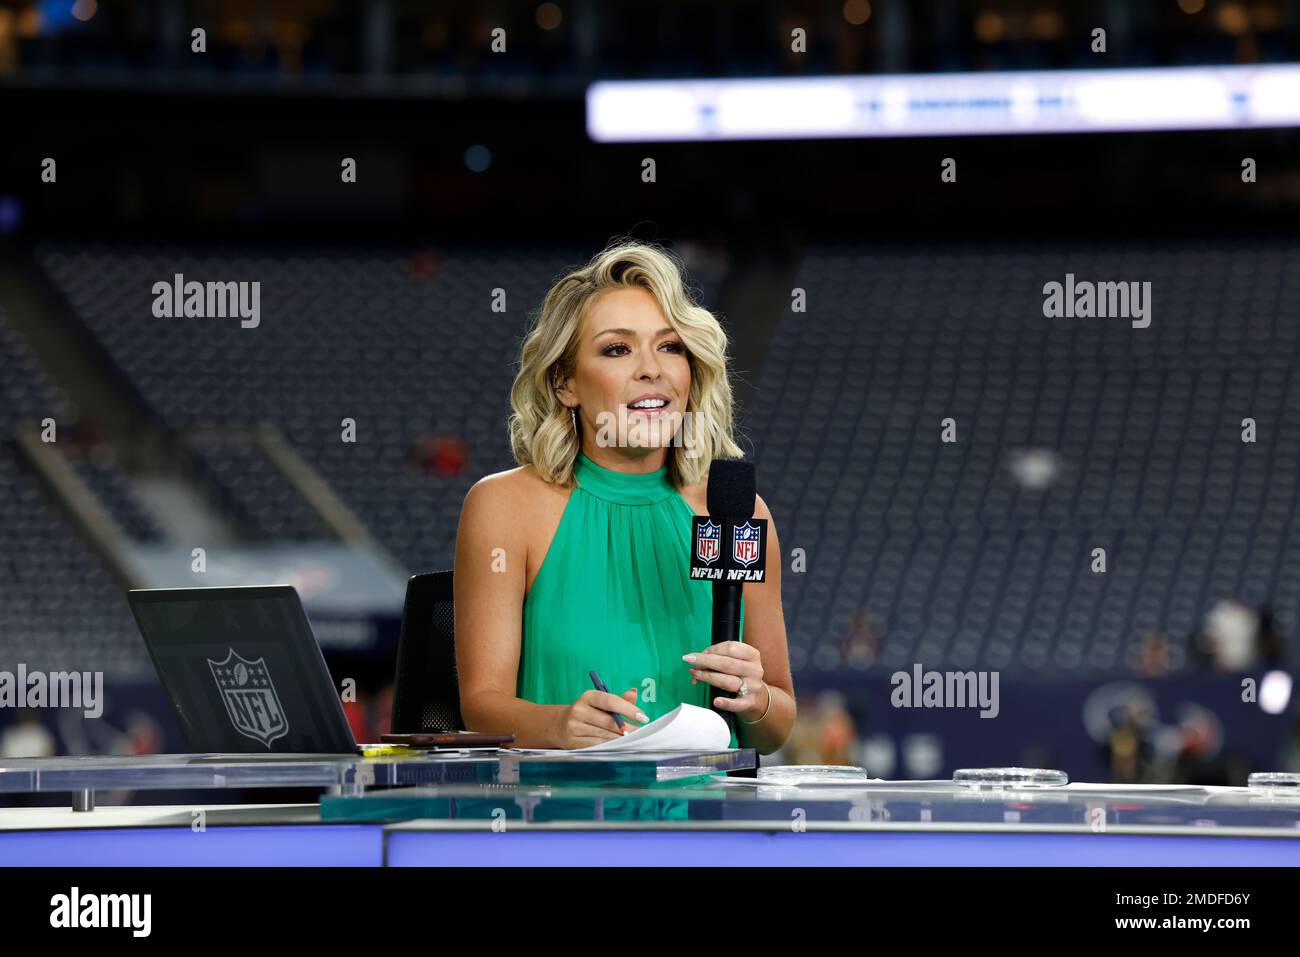 Thursday Night NFL Network host Colleen Wolfe on the set before an NFL football game between the Carolina Panthers and the Houston Texans, Thursday, Sept